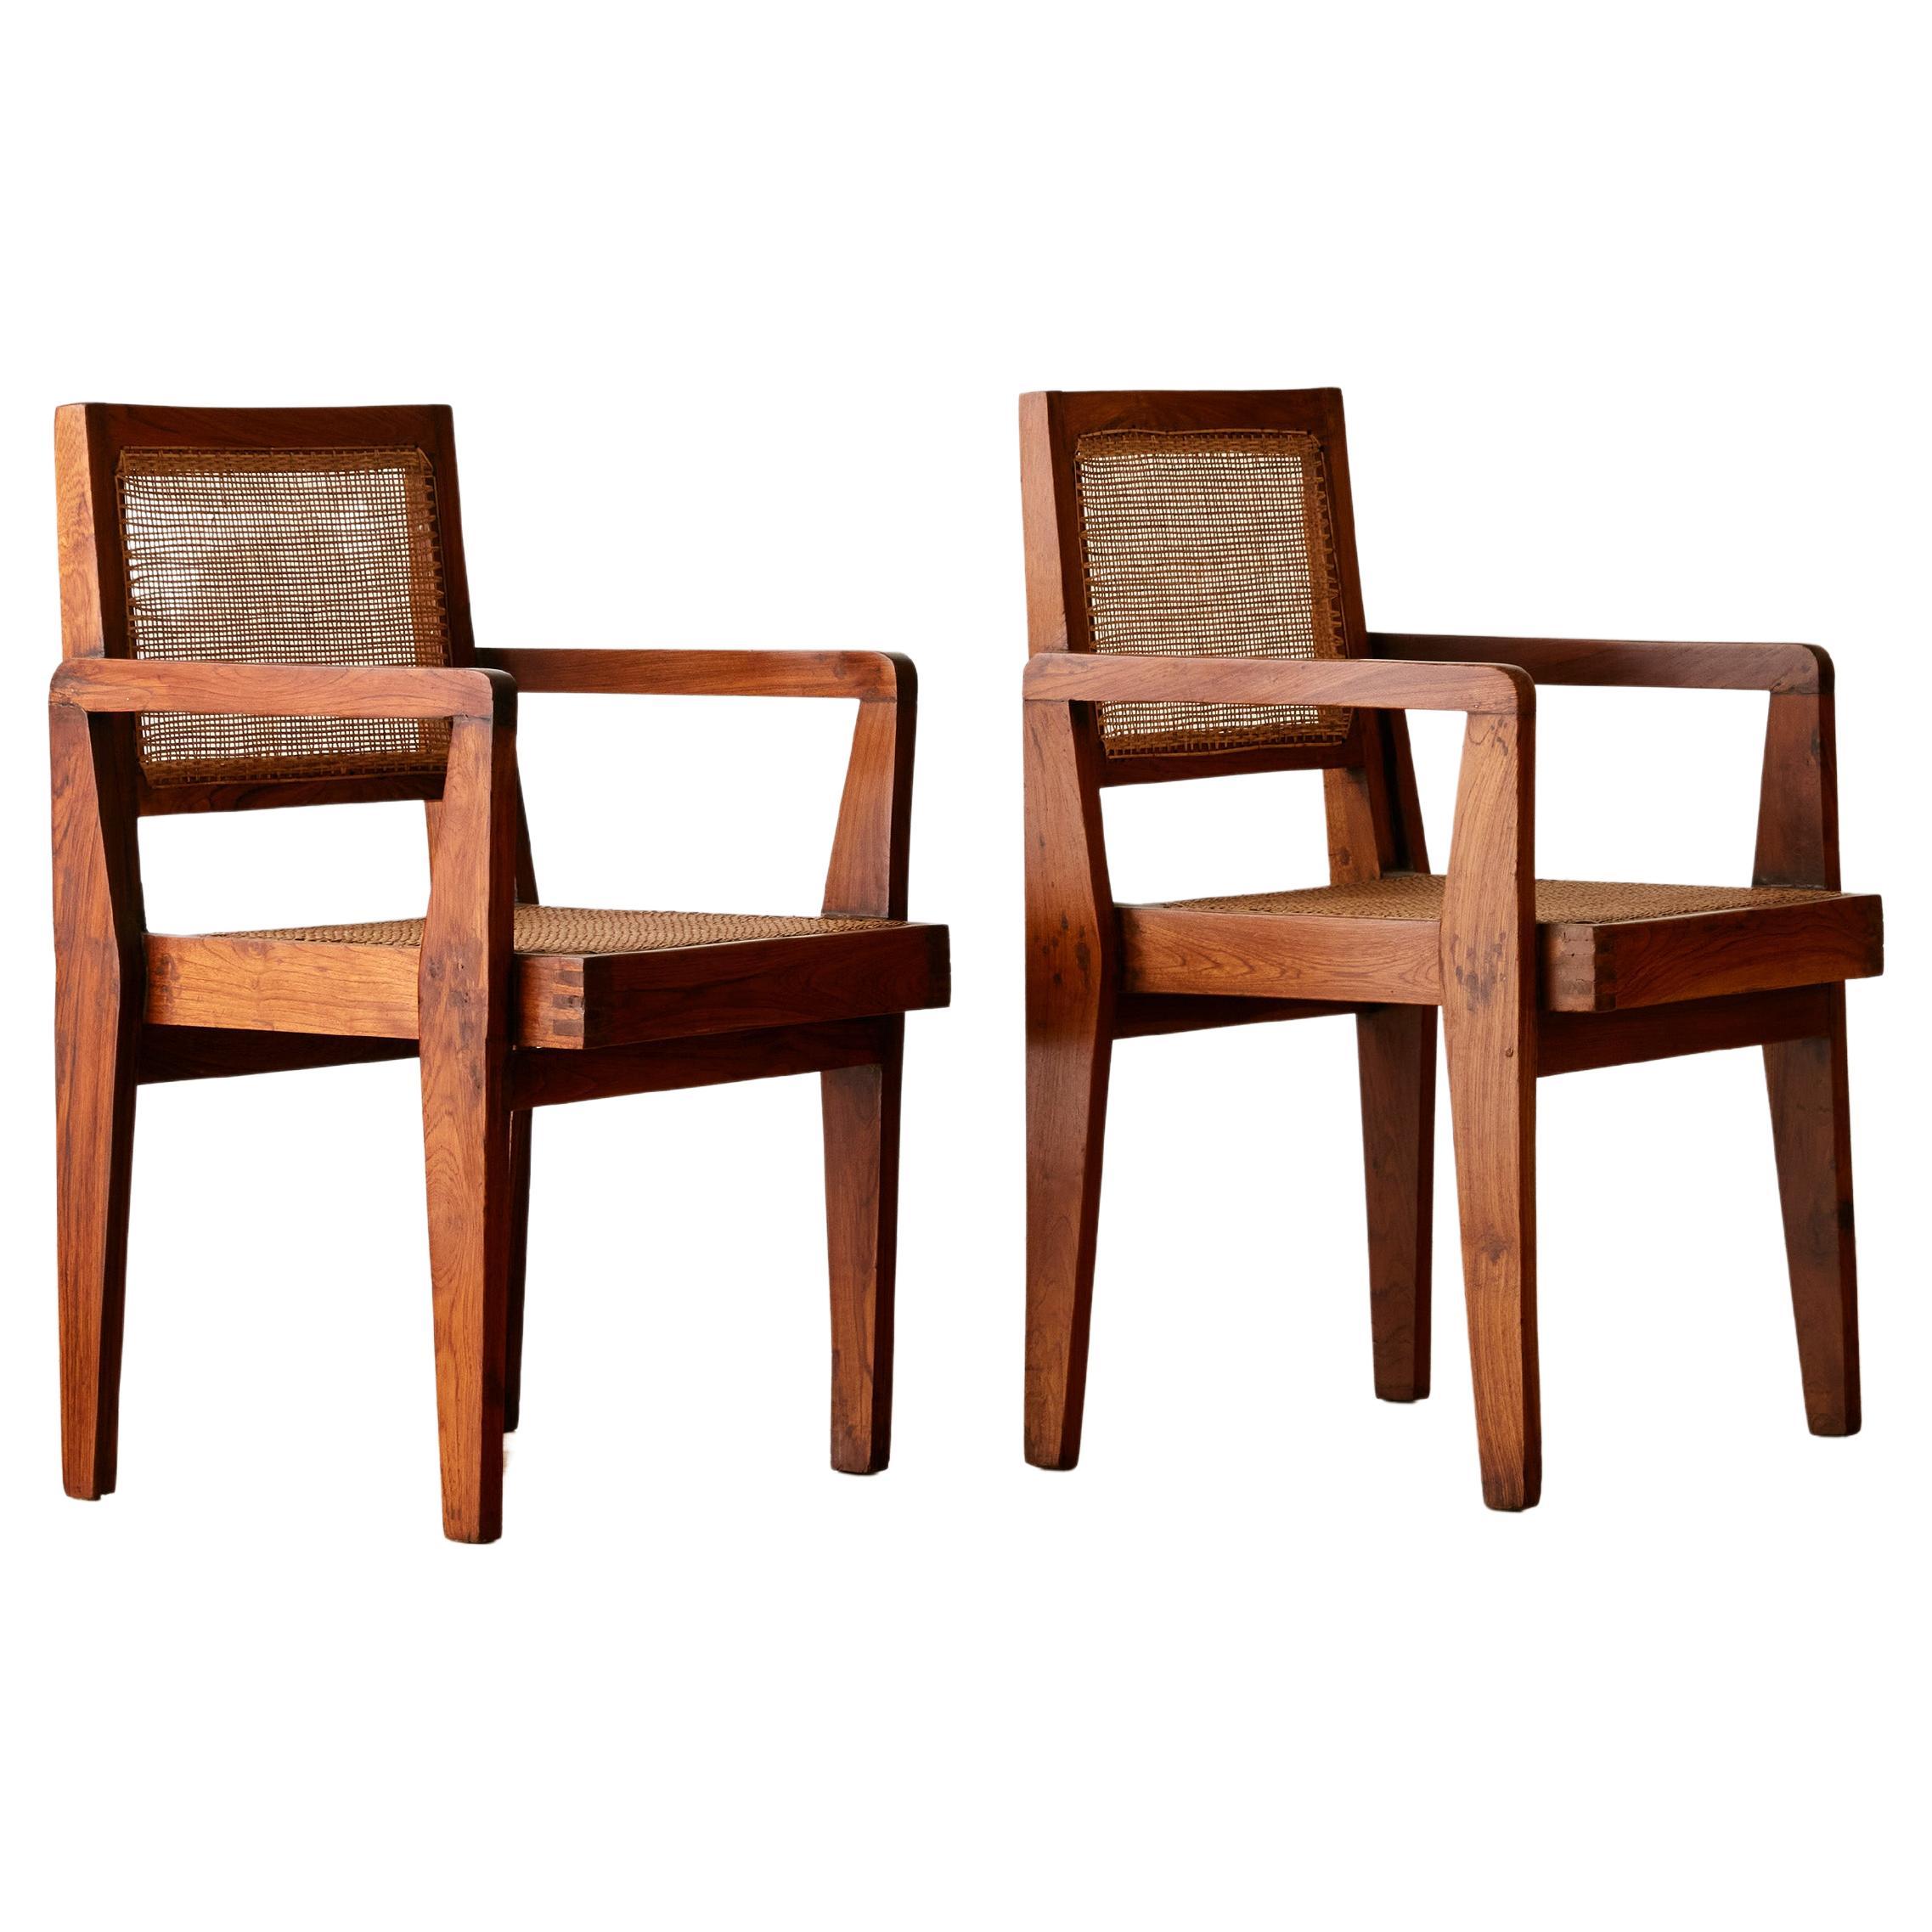 A Pair of Handcrafted Take Down Chairs by Pierre Jeanneret ( Model PJ-SI-20-A) For Sale